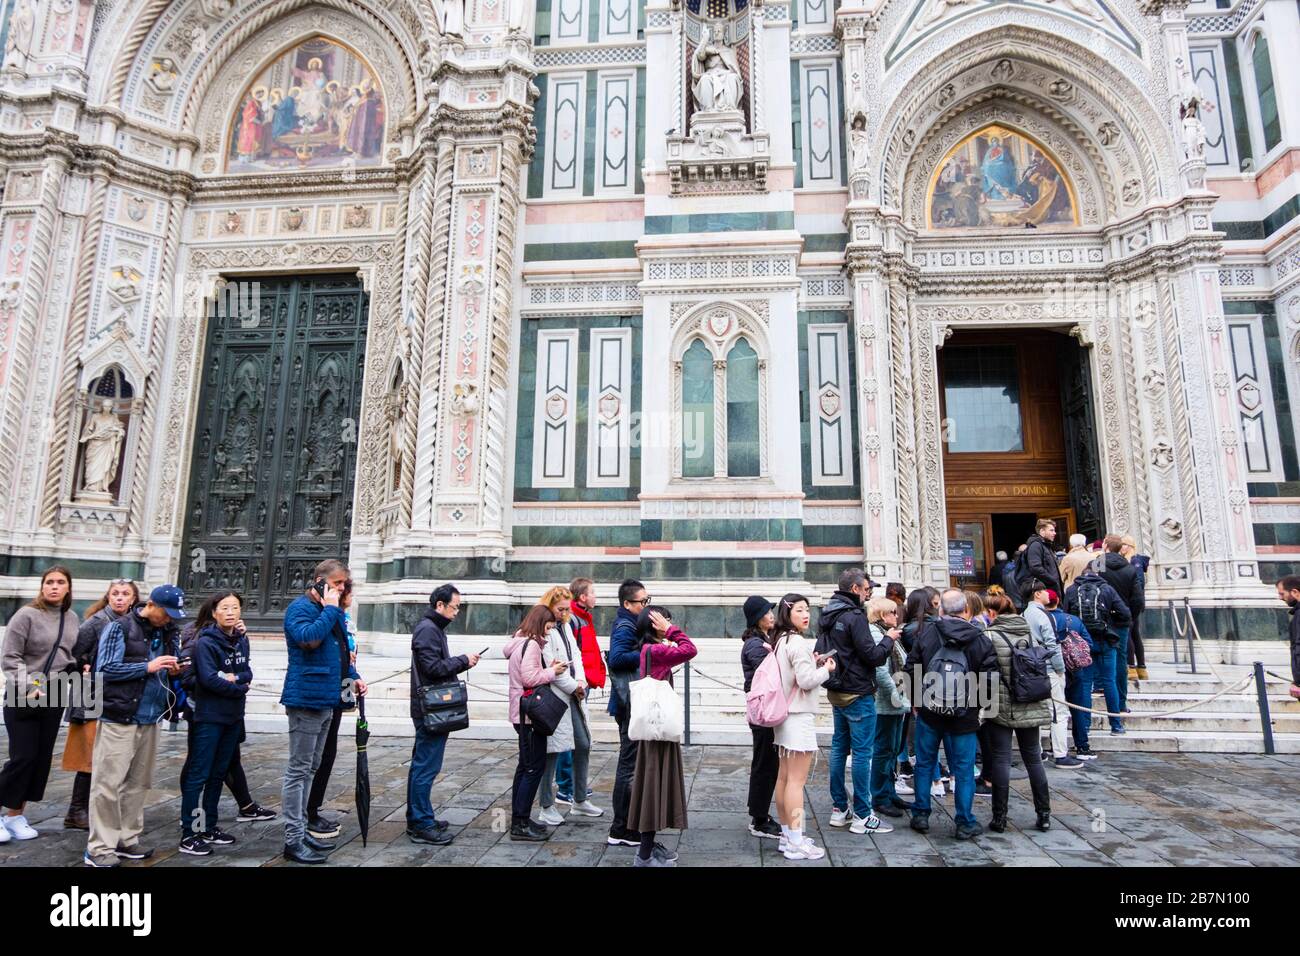 Queue to Duomo, Cattedrale di Santa Maria del Fiore, Cathedral of Florence, Piazza del Duomo, Florence, Italy Stock Photo